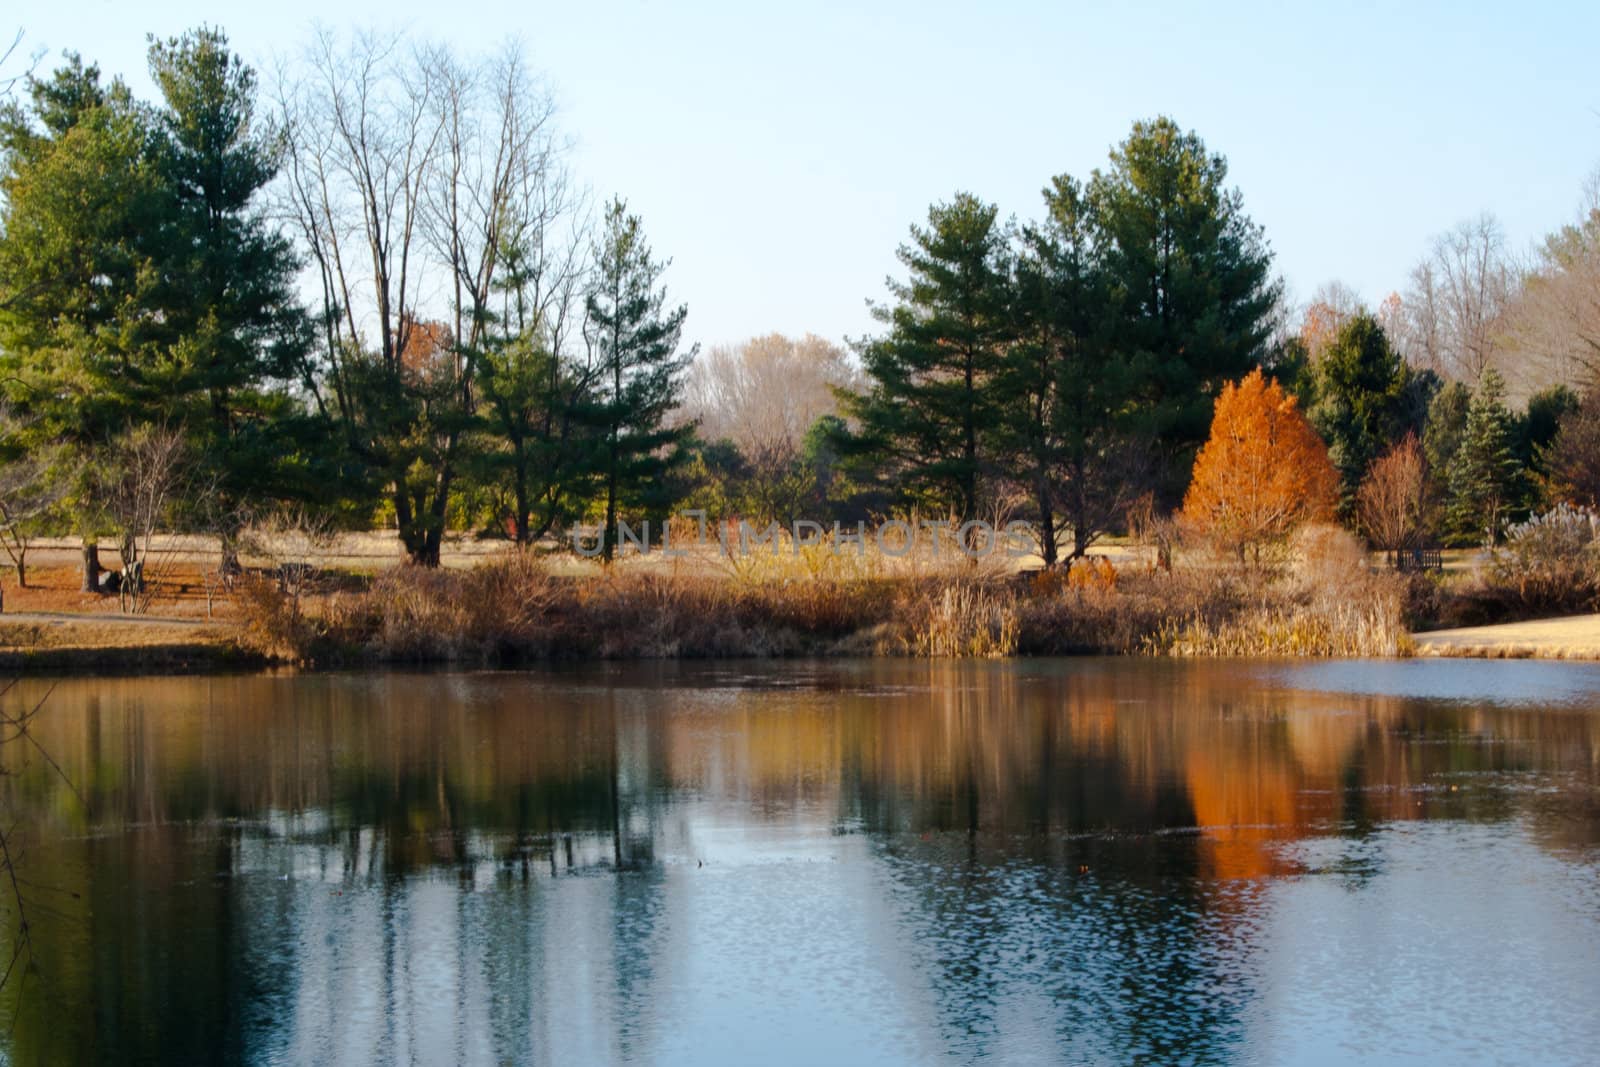 Fall foliage landscape with trees and reflection in a pond.